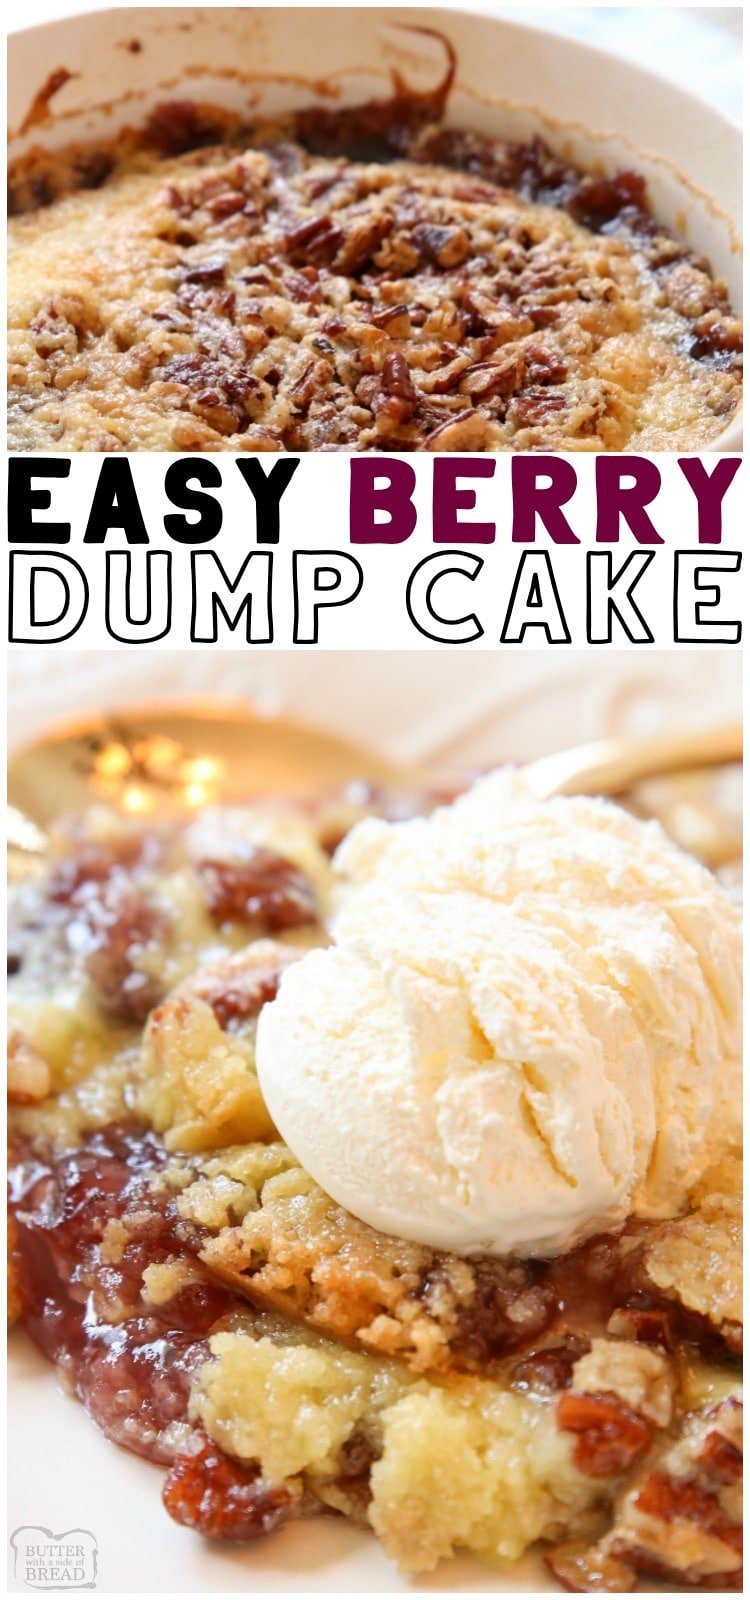 Berry Dump Cake recipe made with just 4 ingredients and ready to serve in 30 minutes! Easy dump cake made with raspberries, blueberries and strawberries. This Berry Cake is perfect served with vanilla ice cream. #dumpcake #dessert #baking #cake #berry #recipe from BUTTER WITH A SIDE OF BREAD